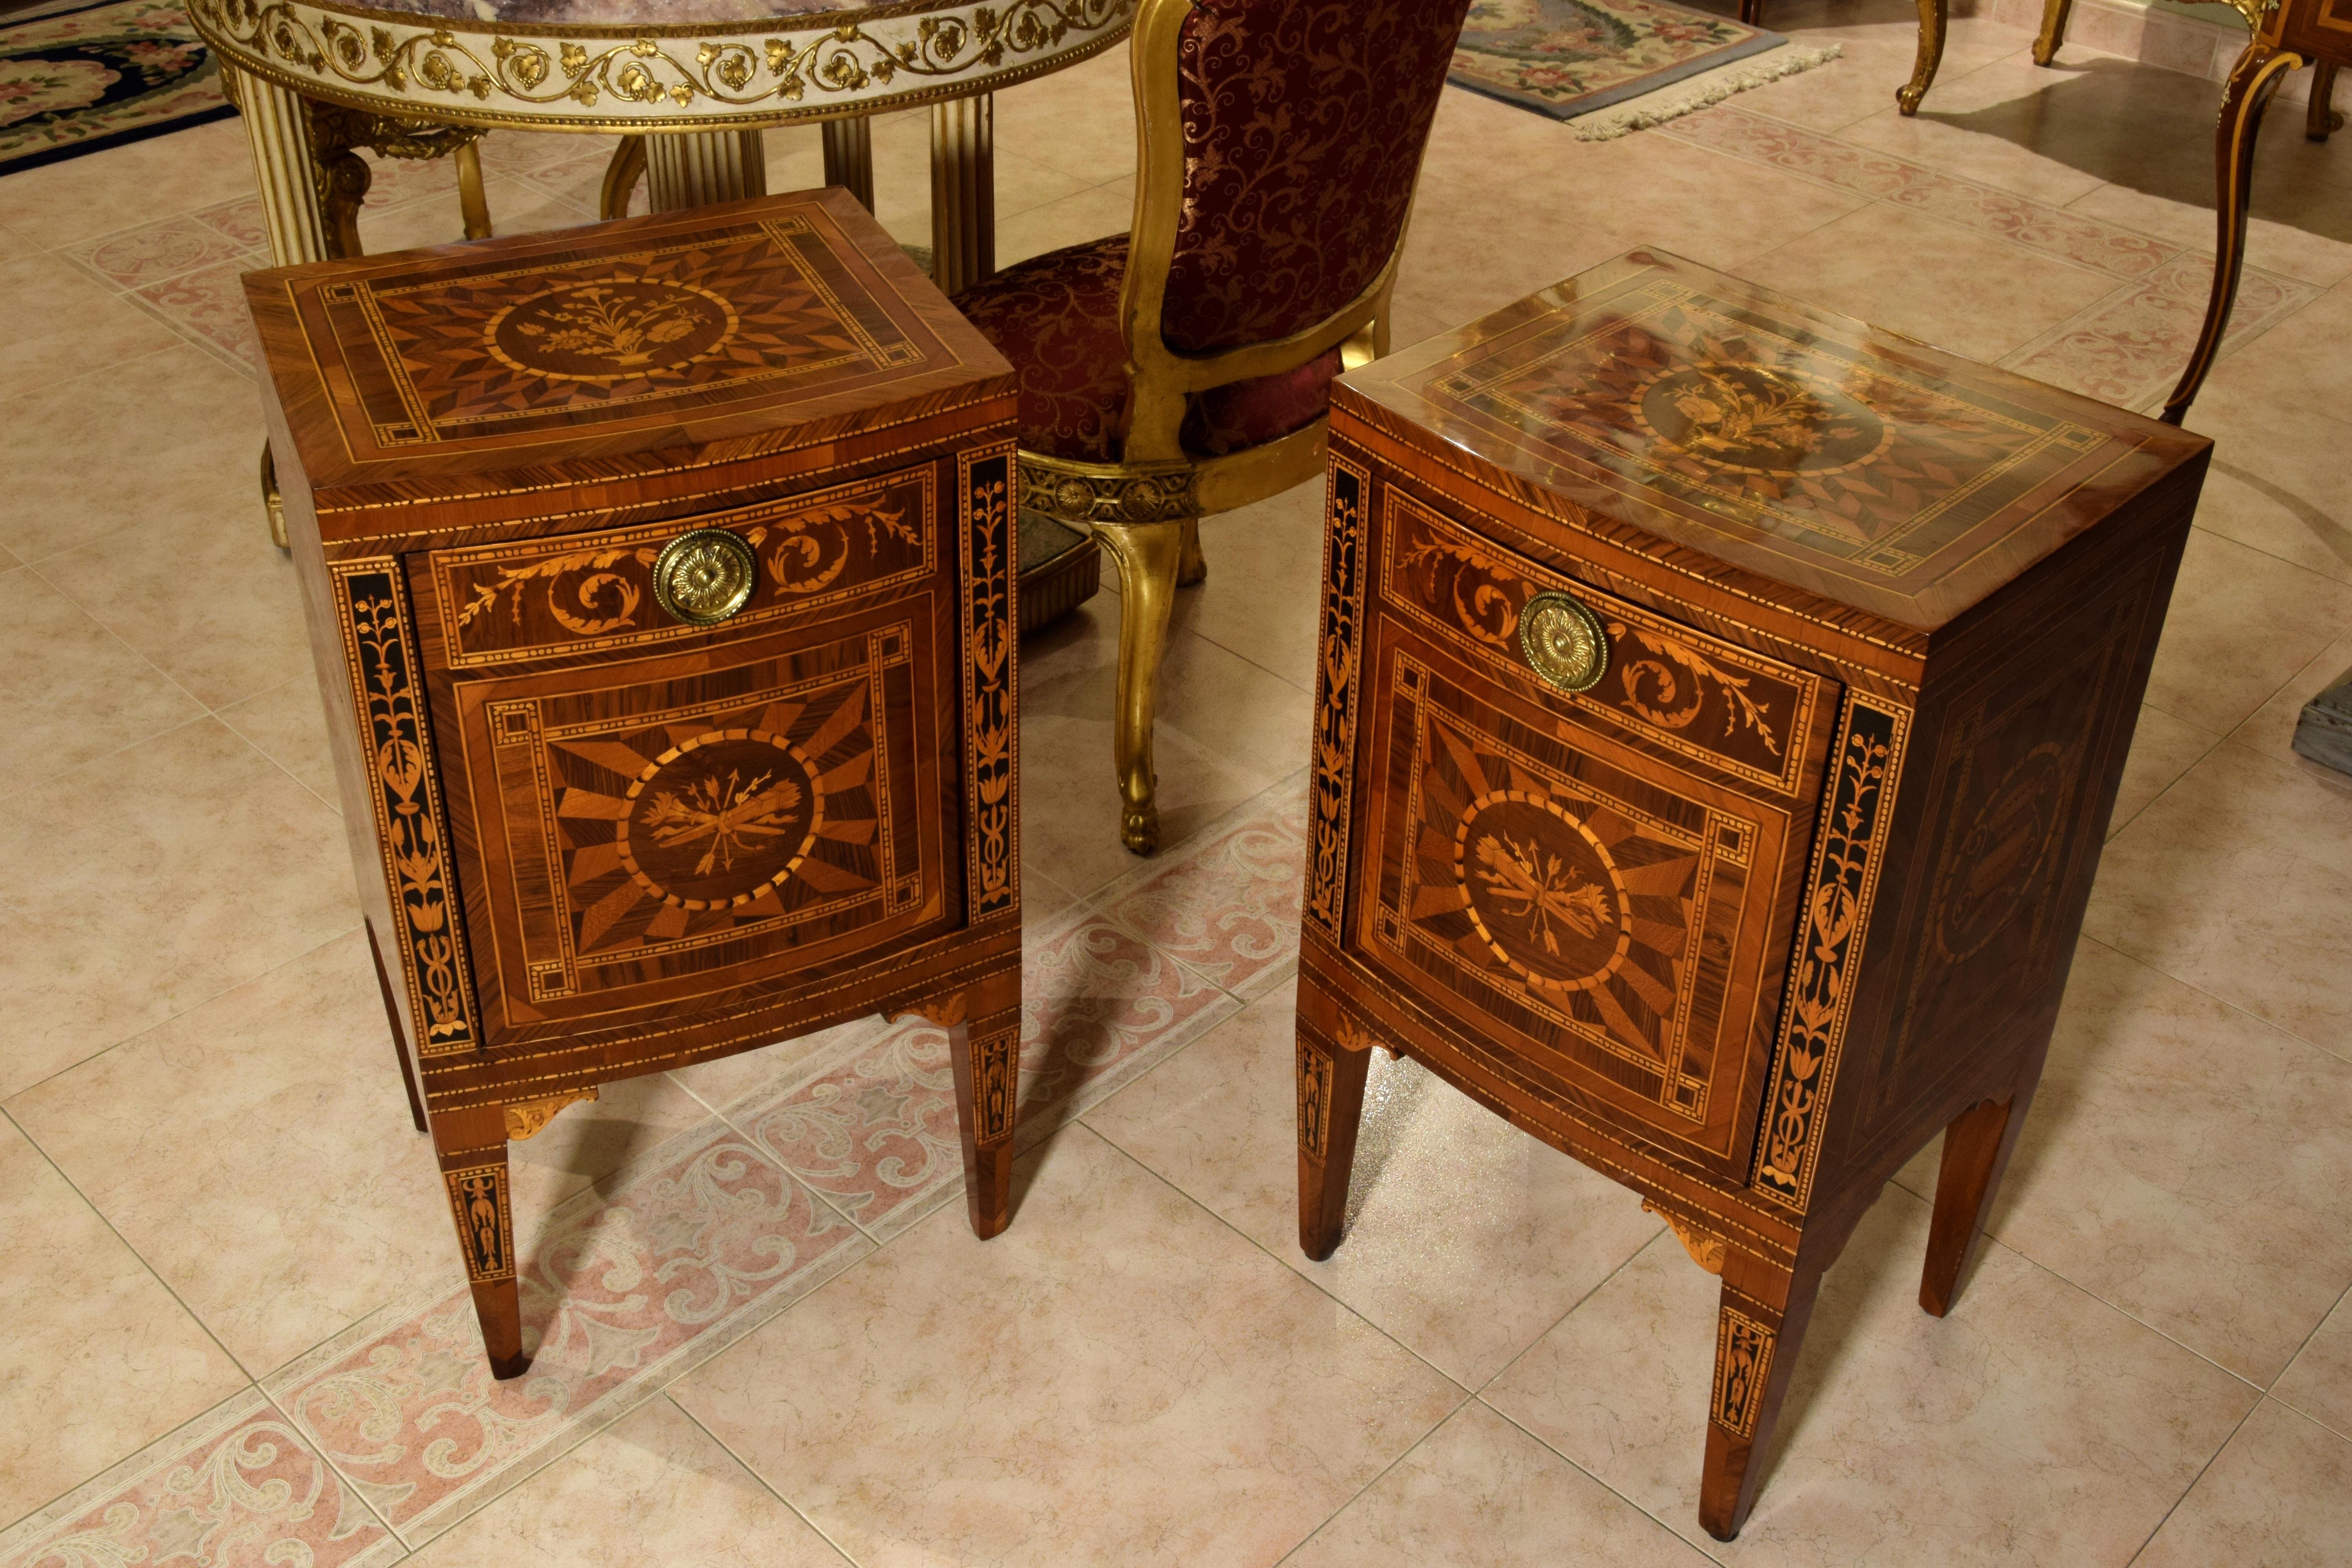 18th century, pair of neoclassical Italian inlaid wood bedside tables

This elegant pair of bedside tables, made in Italy in the late 18th century in the neoclassical era, has a wooden structure paved with walnut wood finely inlaid with the use of